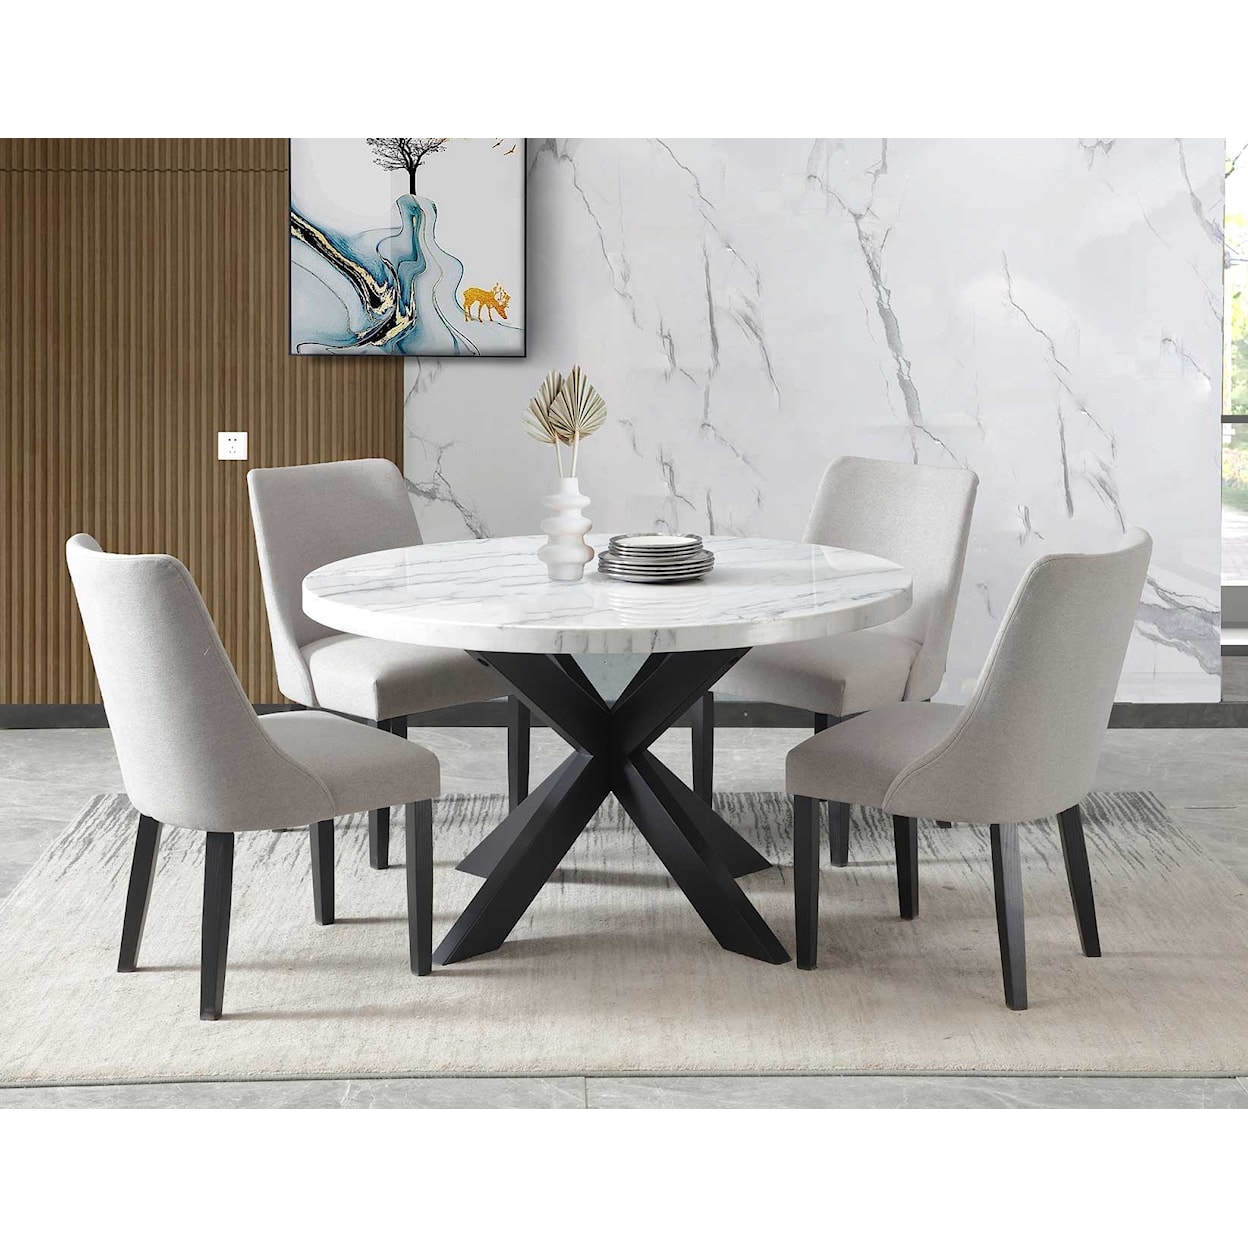 Steve Silver Xena 5 Piece Dining Set with Round Table